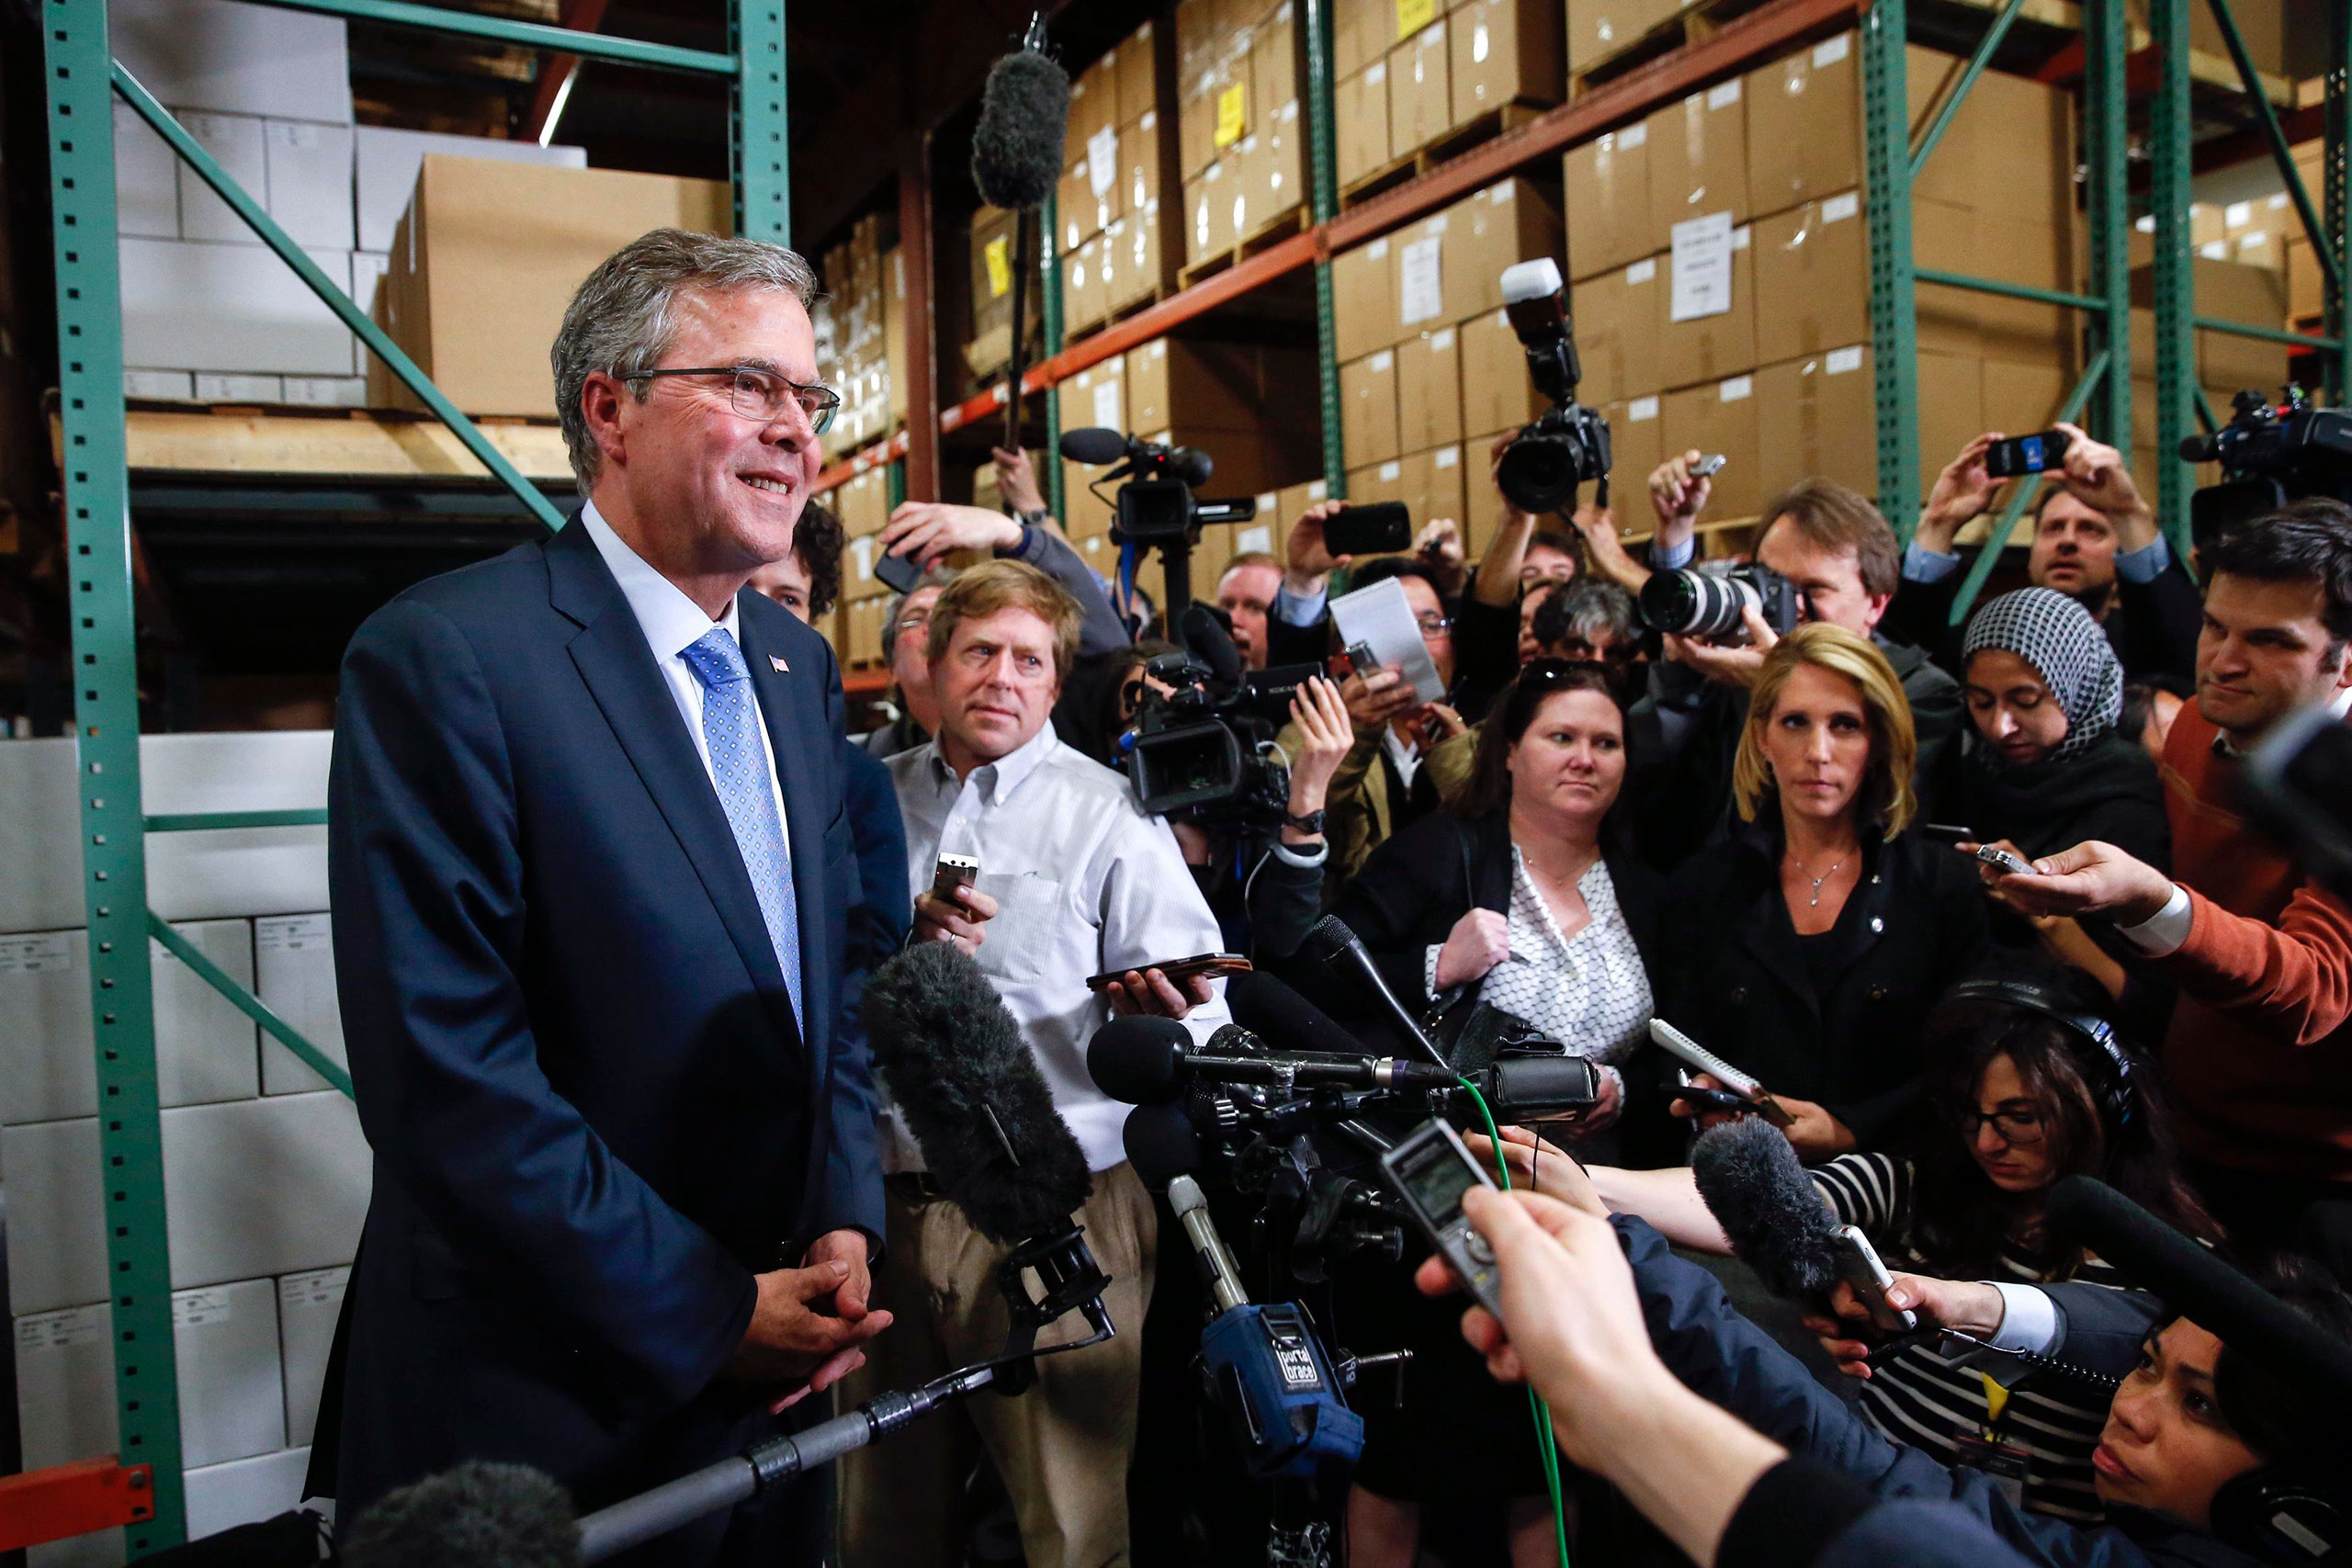 Former Florida Governor Jeb Bush speaks to the media after visiting Integra Biosciences during a campaign stop in Hudson, New Hampshire March 13, 2015. (Shannon Stapleton—Reuters)